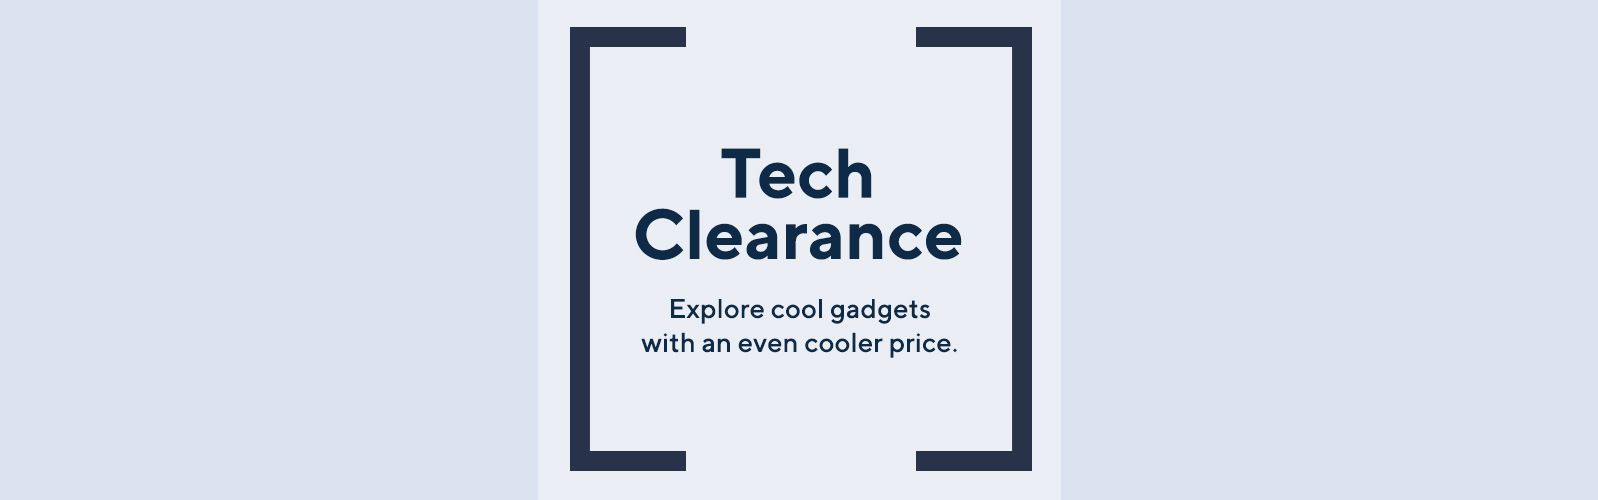 Tech Clearance - Explore cool gadgets with an even cooler price.